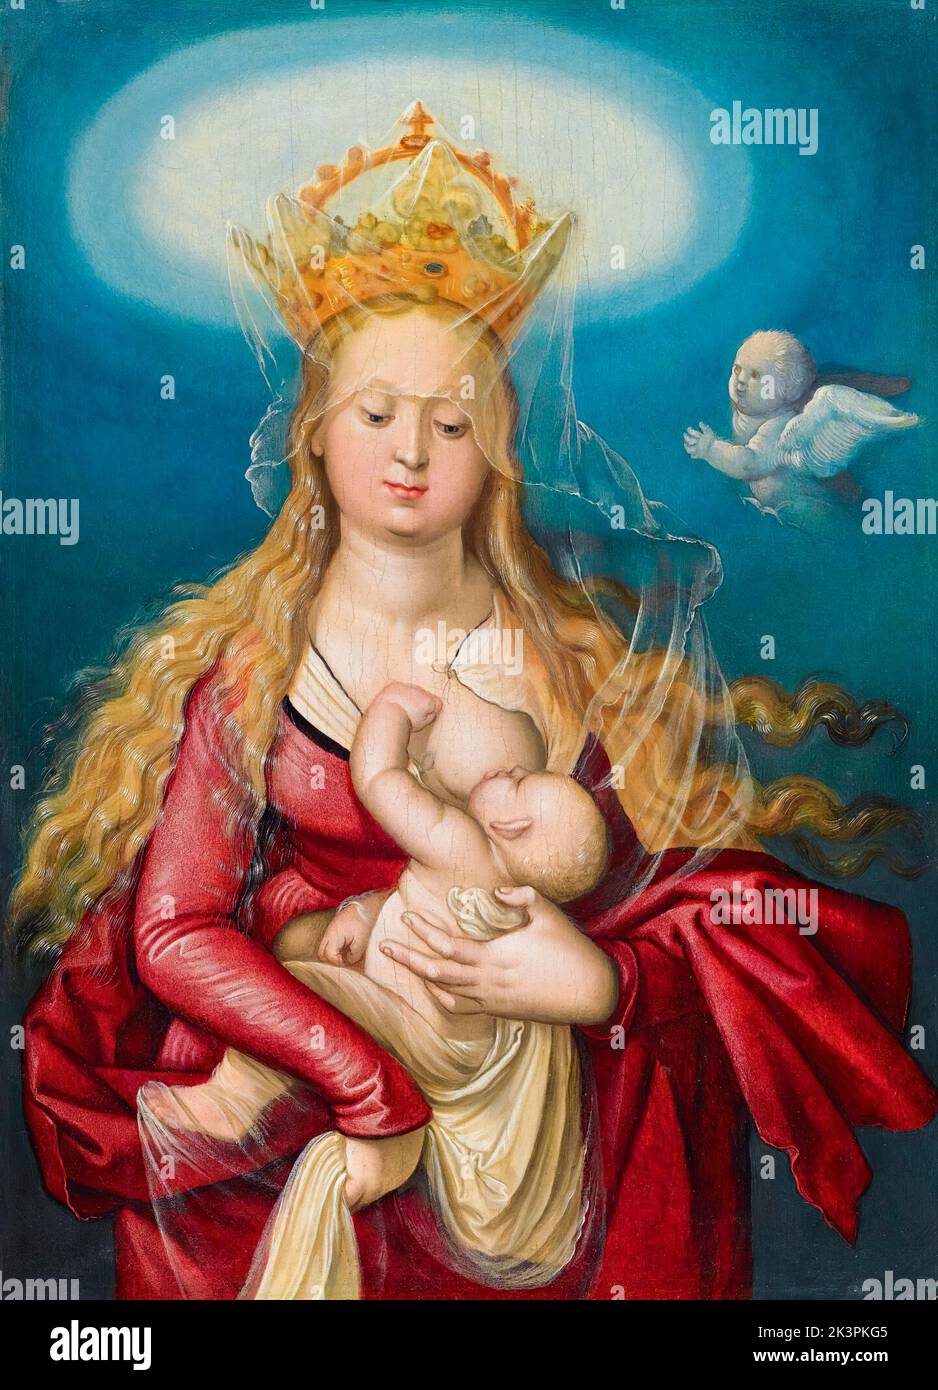 The Virgin, as, Queen of Heaven, suckling the, infant Christ, painting in Oil on limewood by Hans Baldung Grien, 1517-1518 Stock Photo